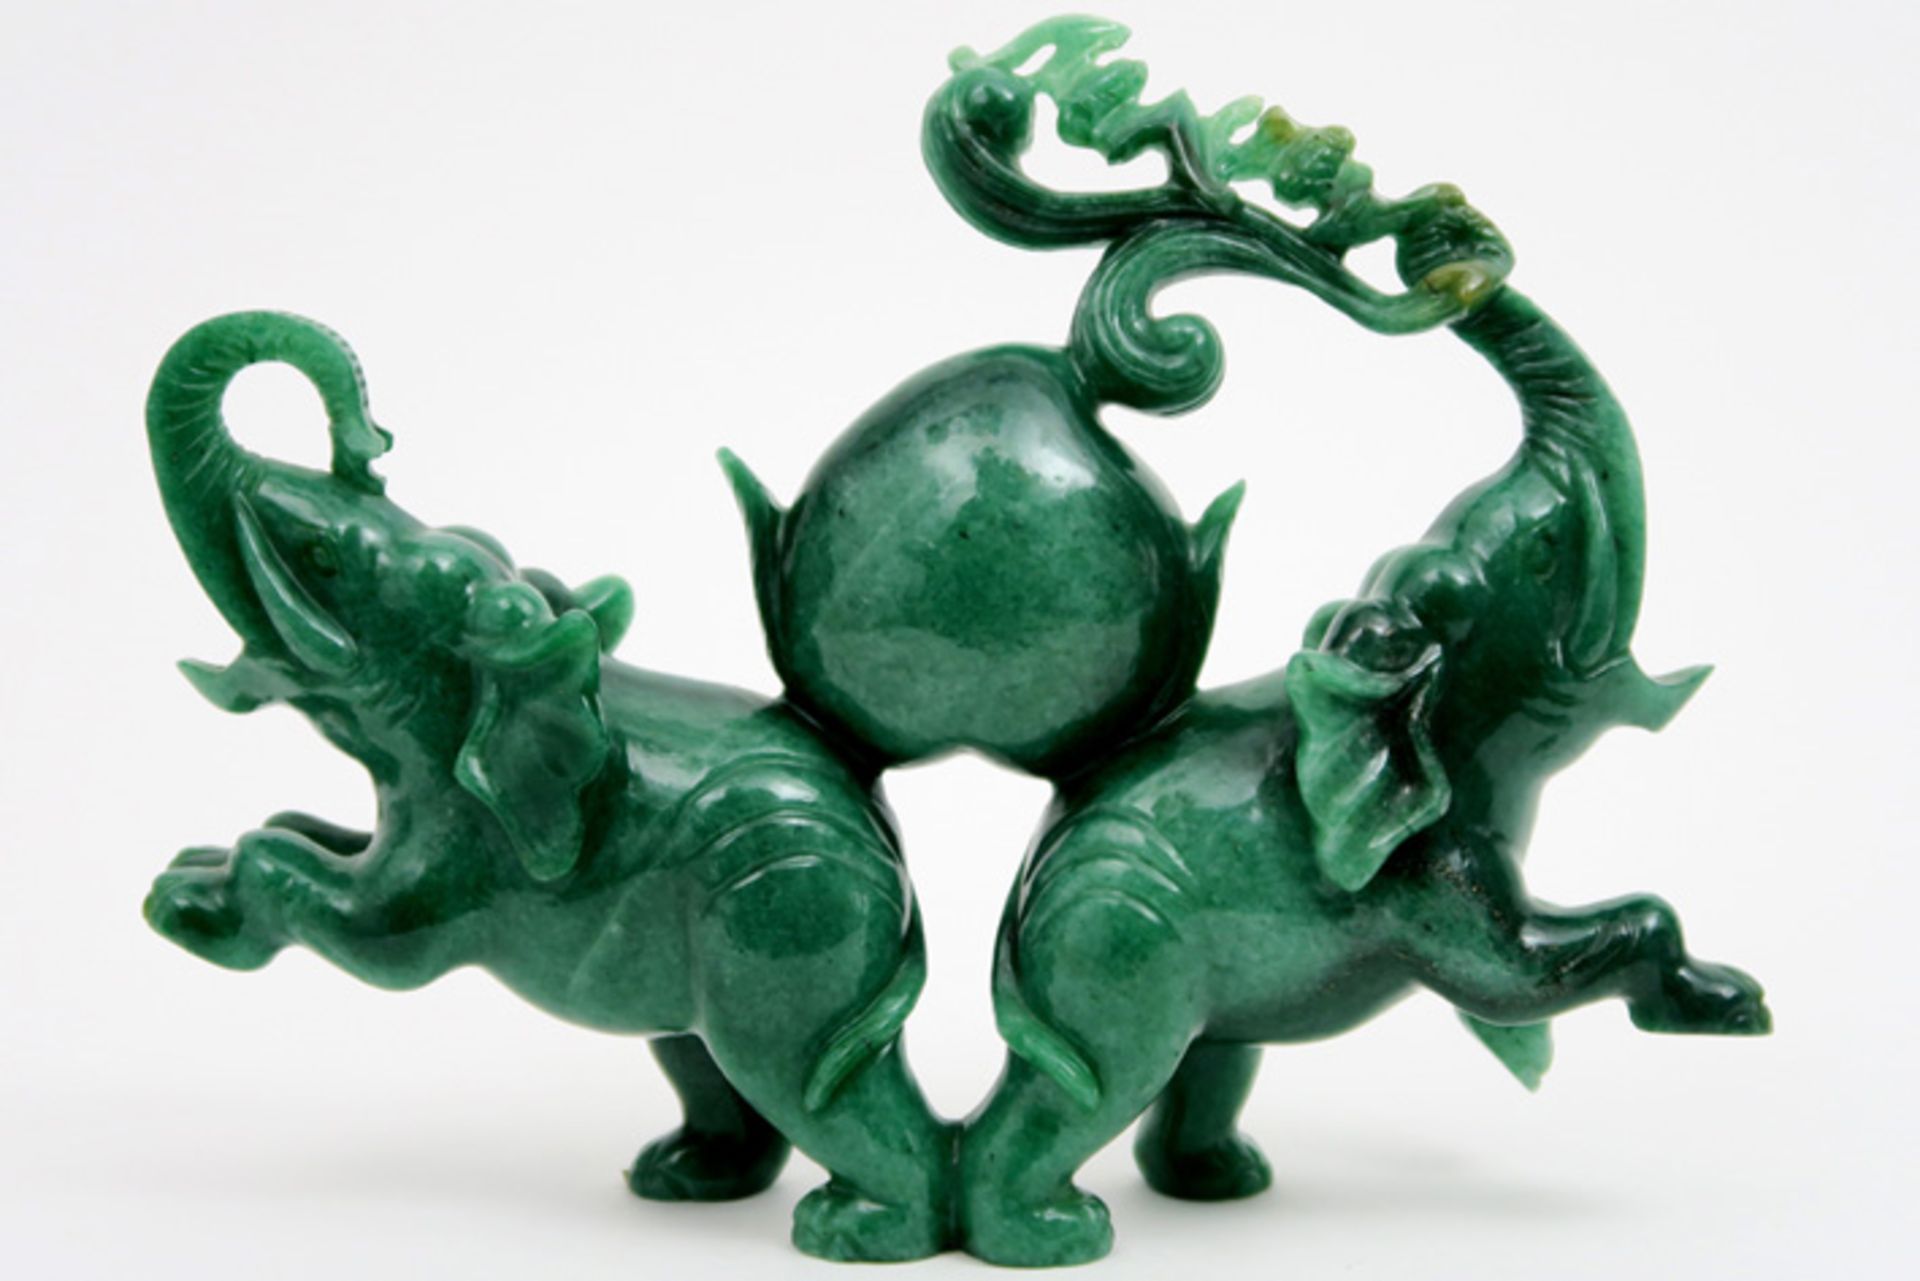 Chinese "good luck" sculpture in aventurine with elephants, bats and a peach Chinese sculptuur /